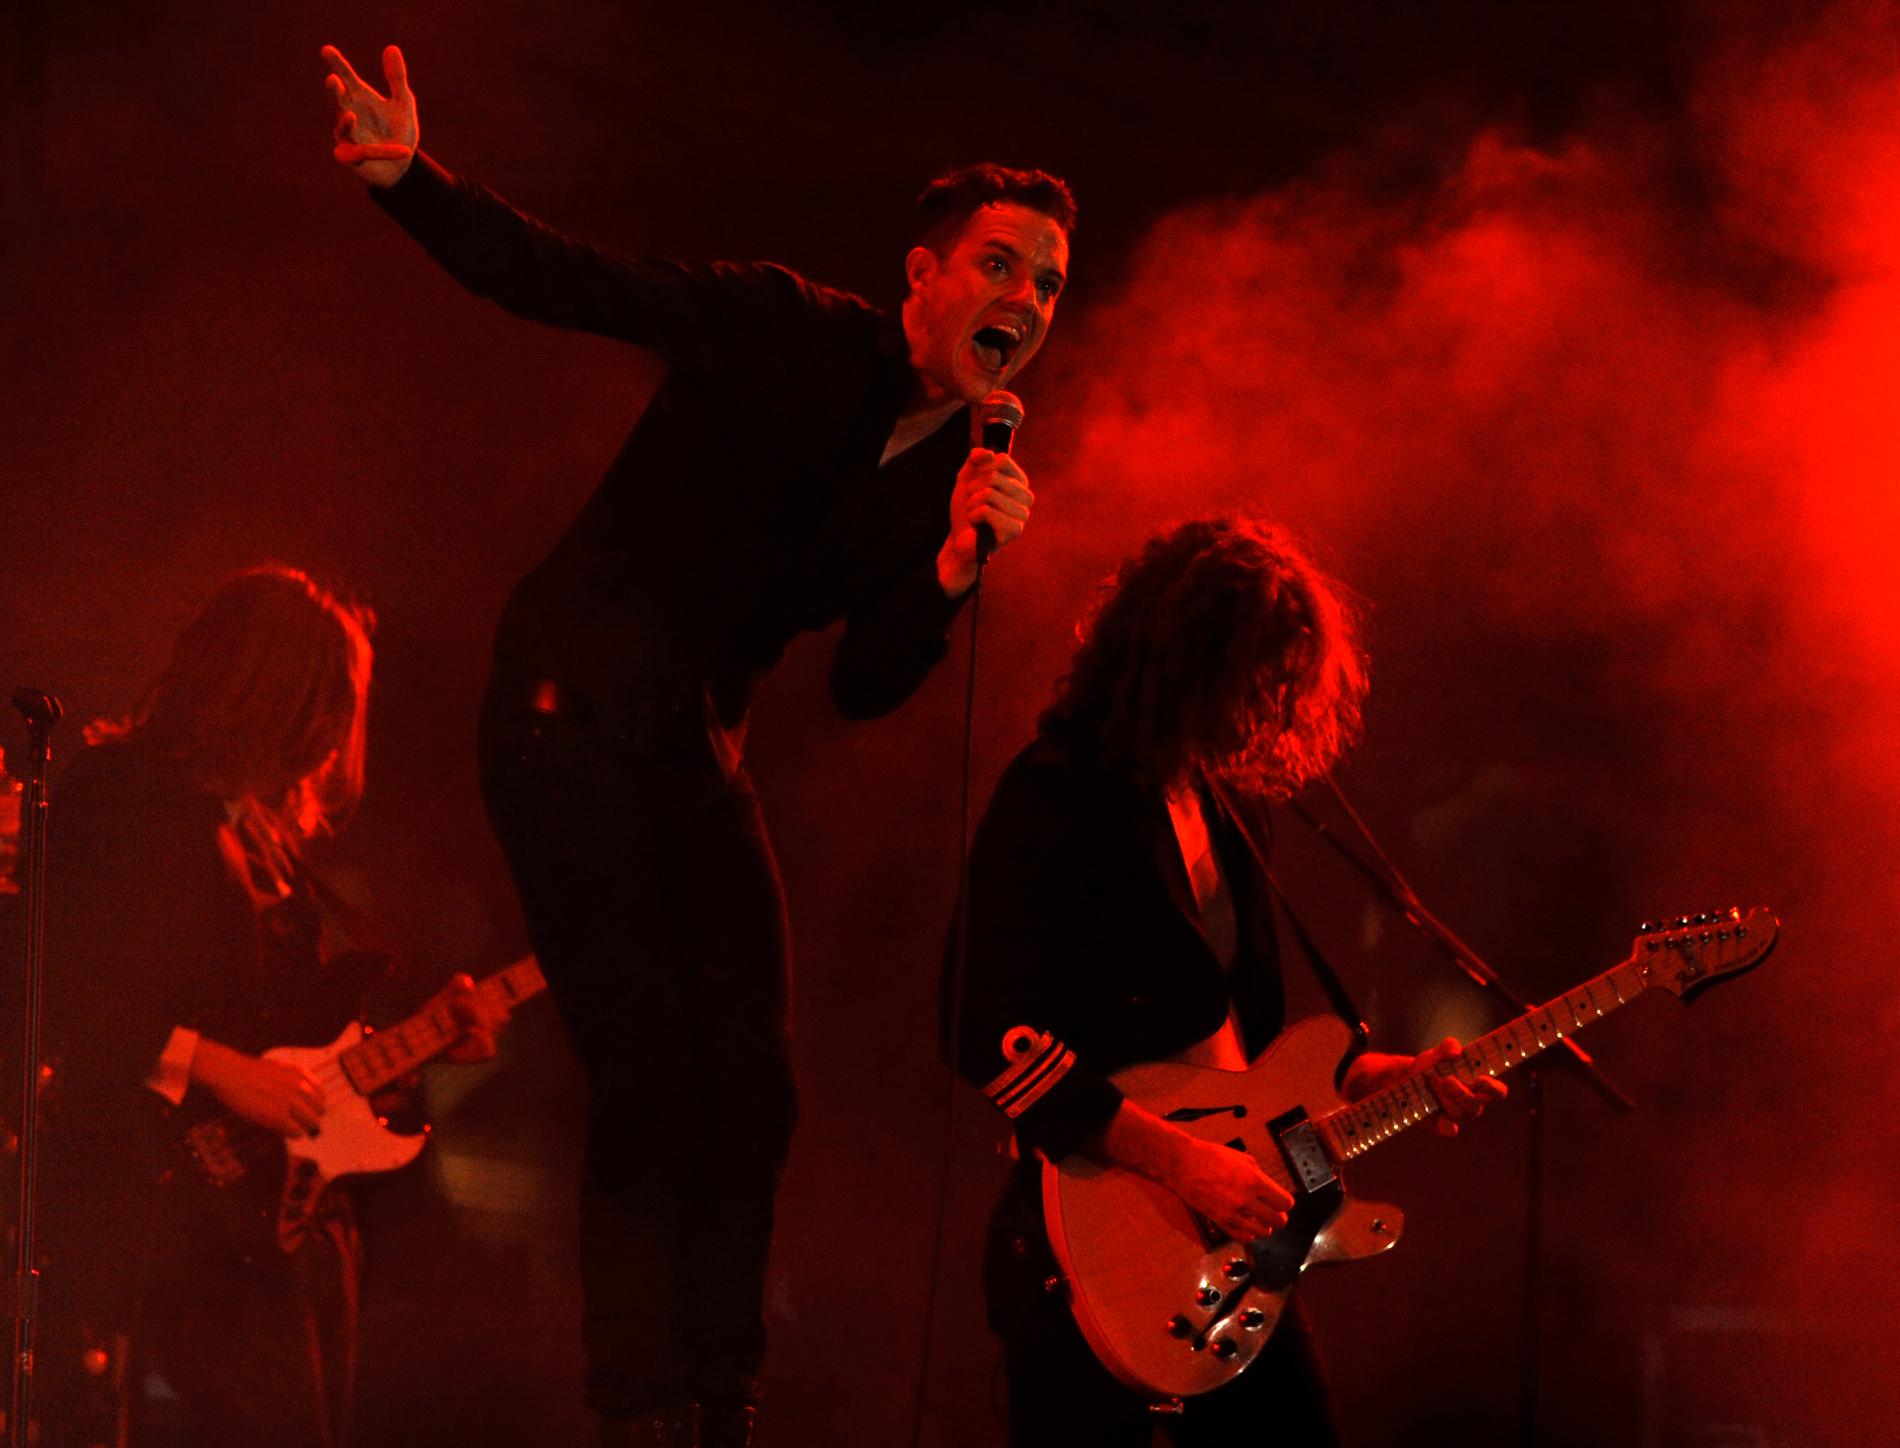 ”The Killers”.